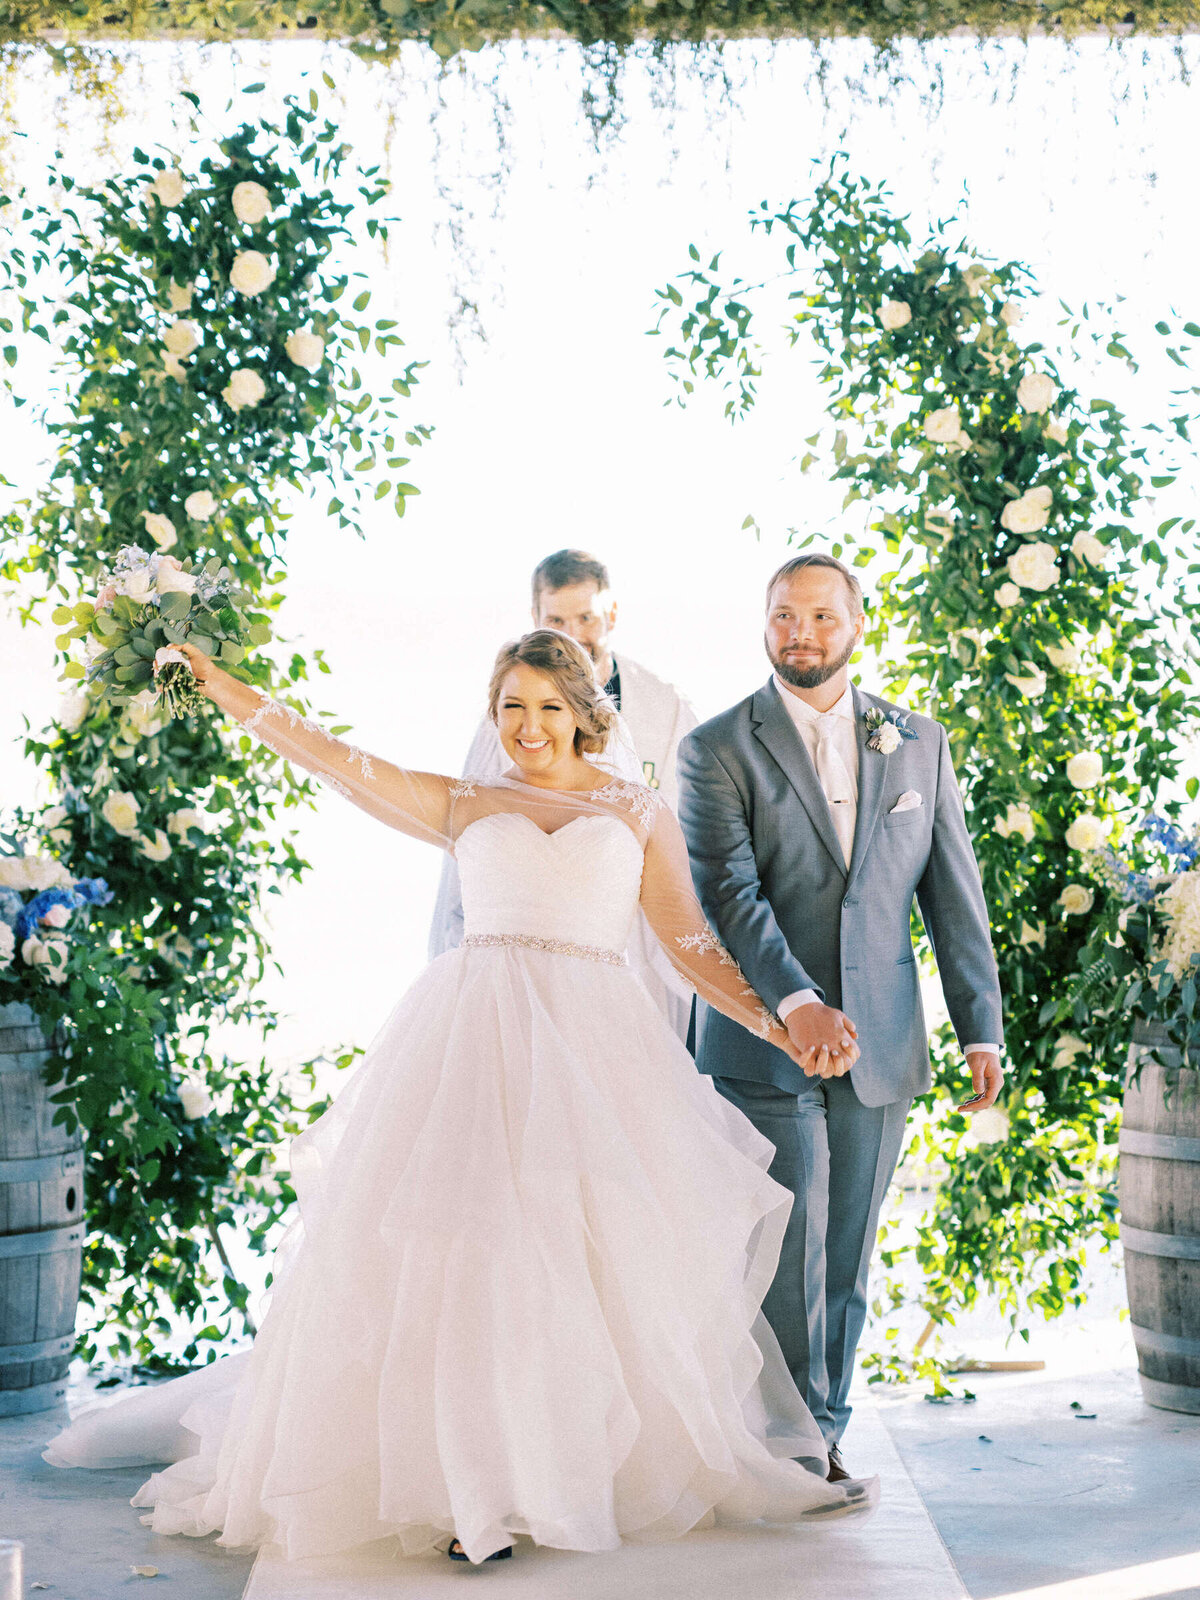 Newly married couple celebrates at the altar at spring wedding